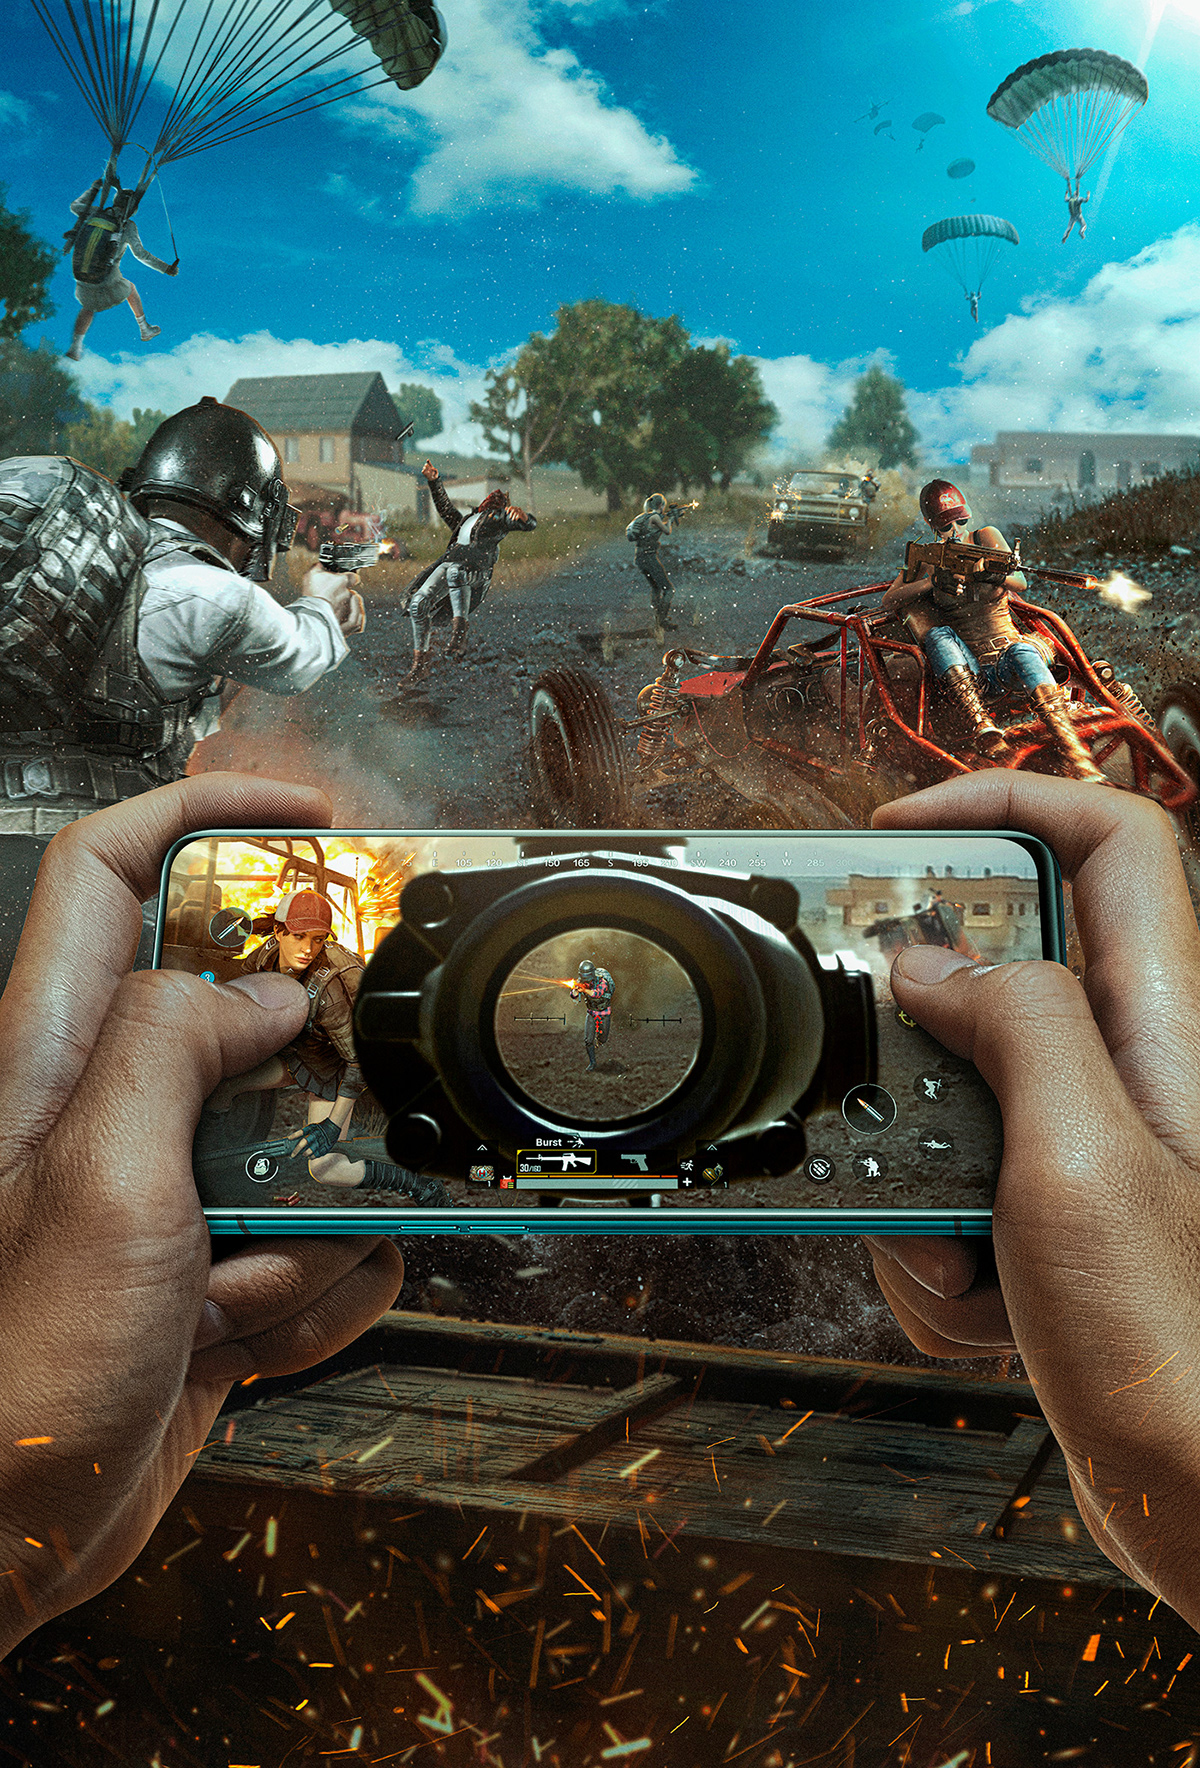 Oppo pubg Gaming key art smartphone video game compositing action Advertising  esports